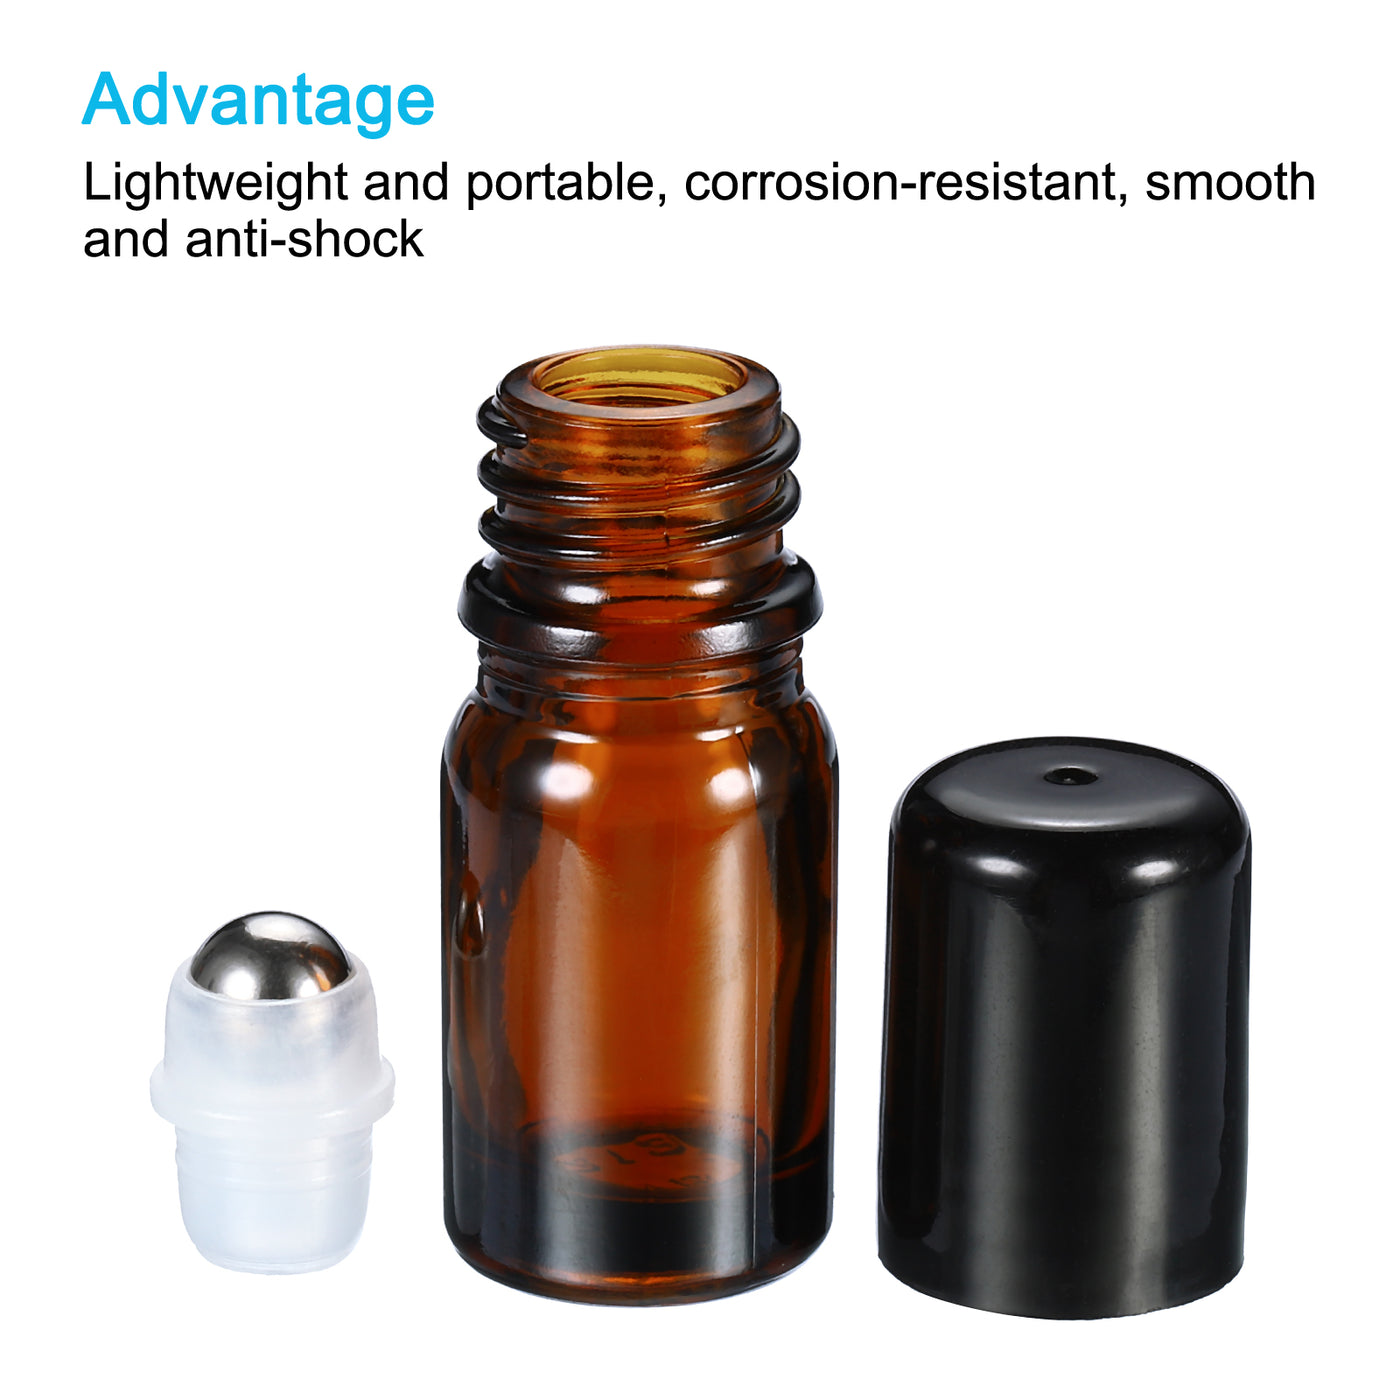 Harfington 5mL Roller Bottles, 6 Pack Amber Glass Essential Oil Roller Ball Black Caps Refillable Sample Containers, Brown